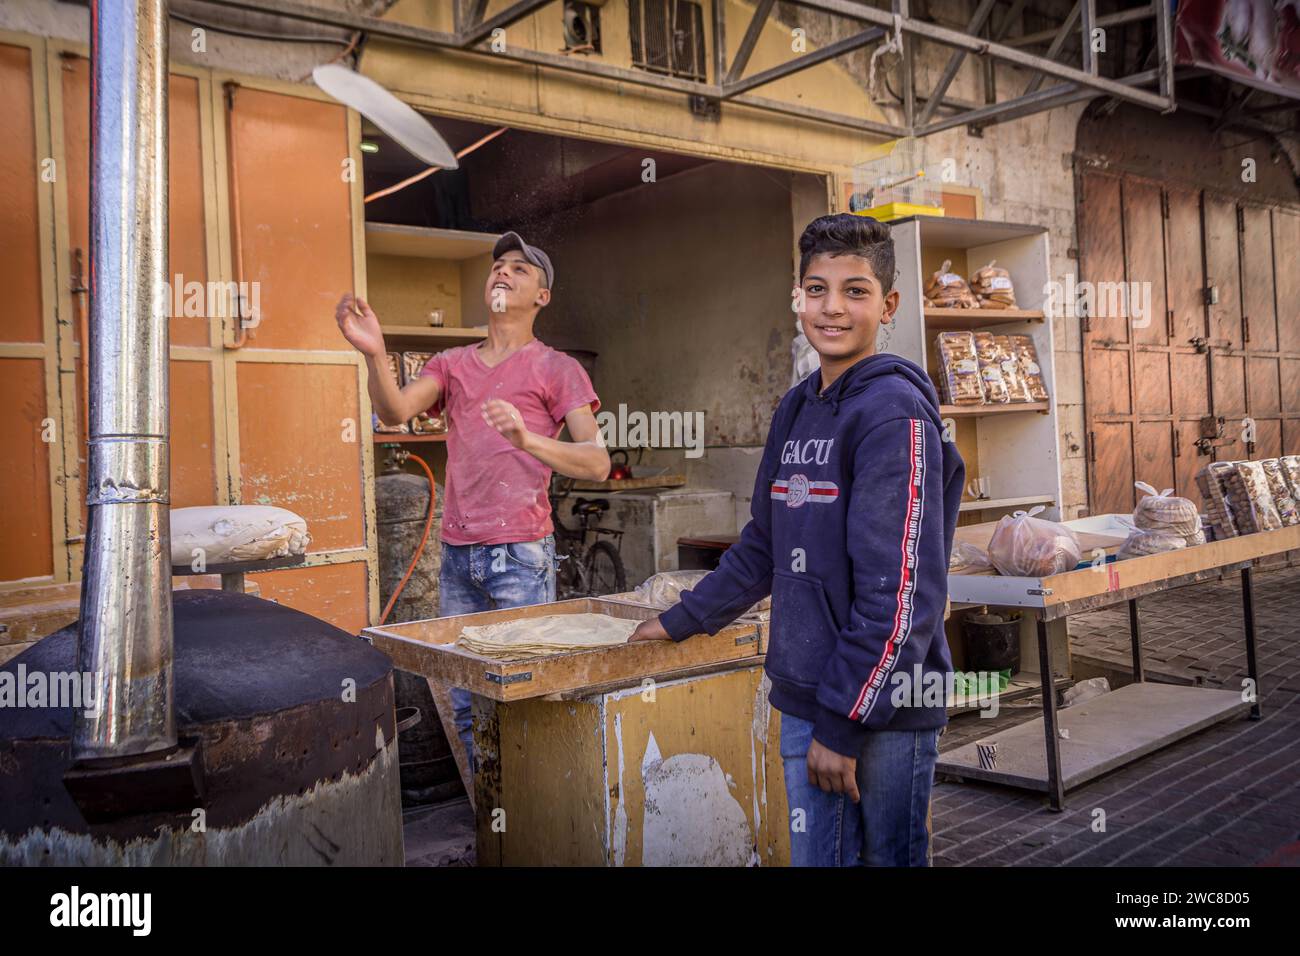 The Palestinian boys are making bread at the local bakery in the downtown of Hebron, West Bank, Palestine. Stock Photo